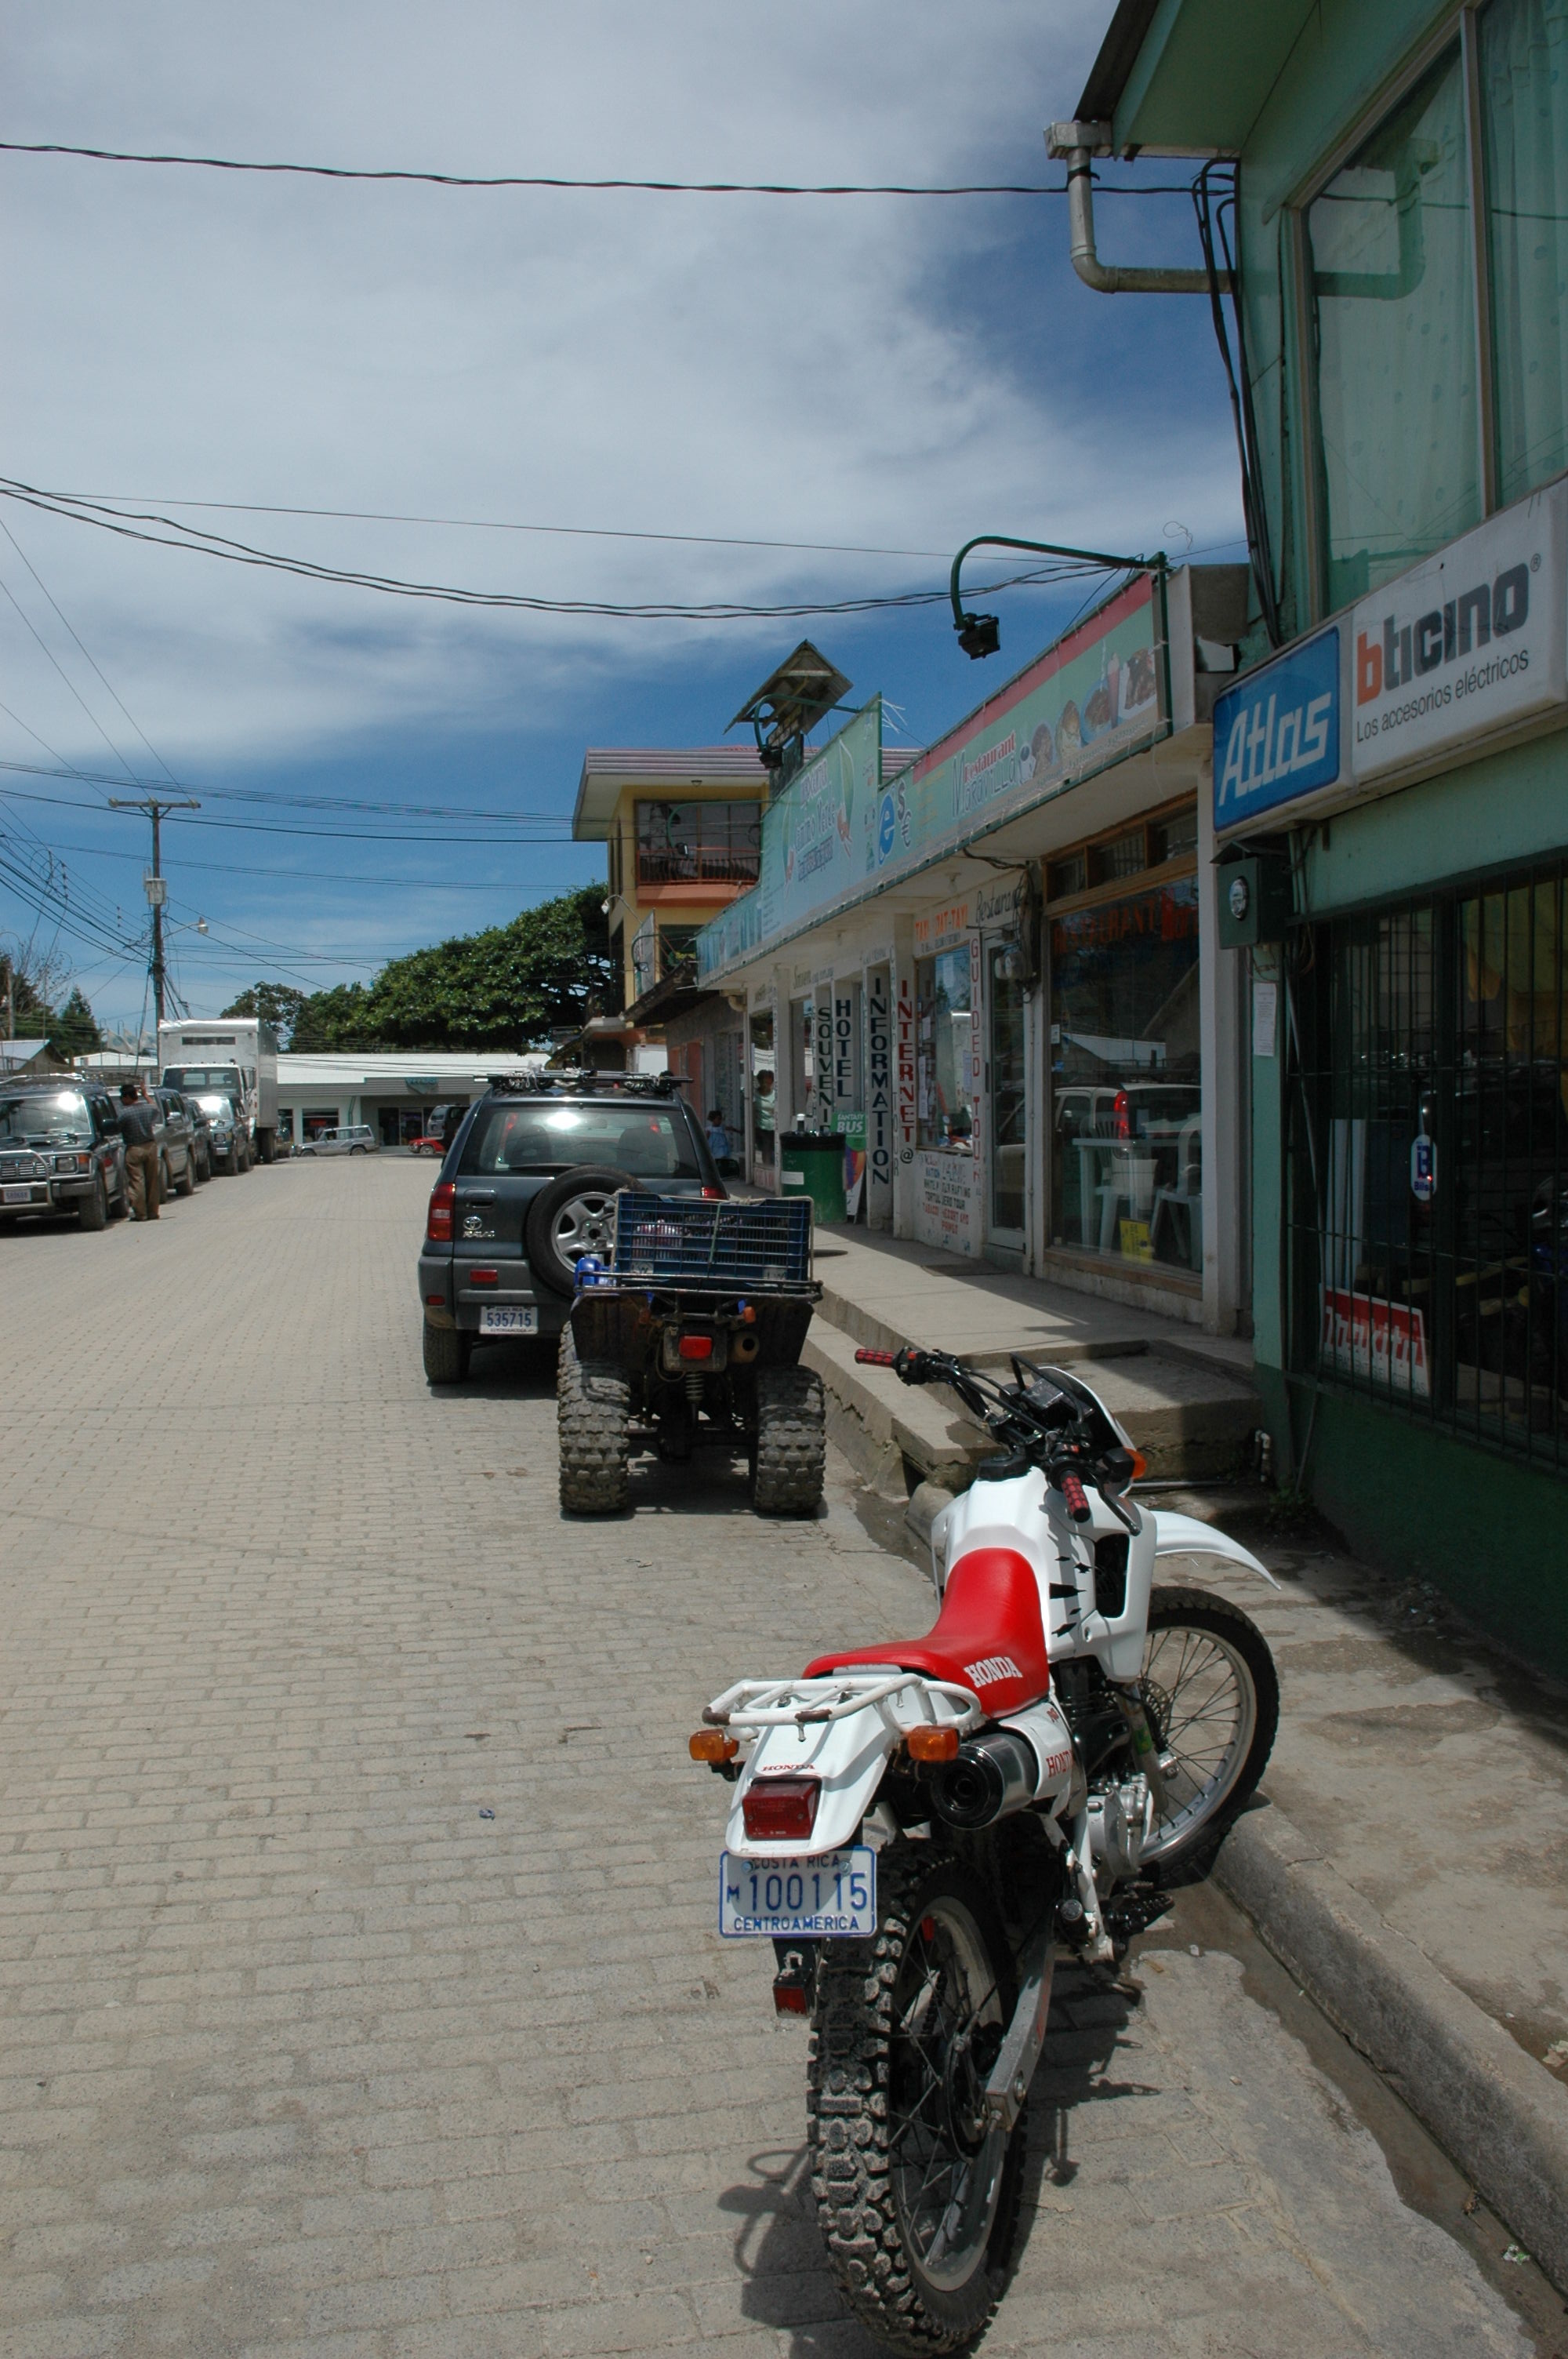 Downtown Santa Elena, close to the Monteverde Cloud Forest.  In the foreground you can see the preferred method of transport, the dirtbike.  Note the large shock absorbers and knobby tires.